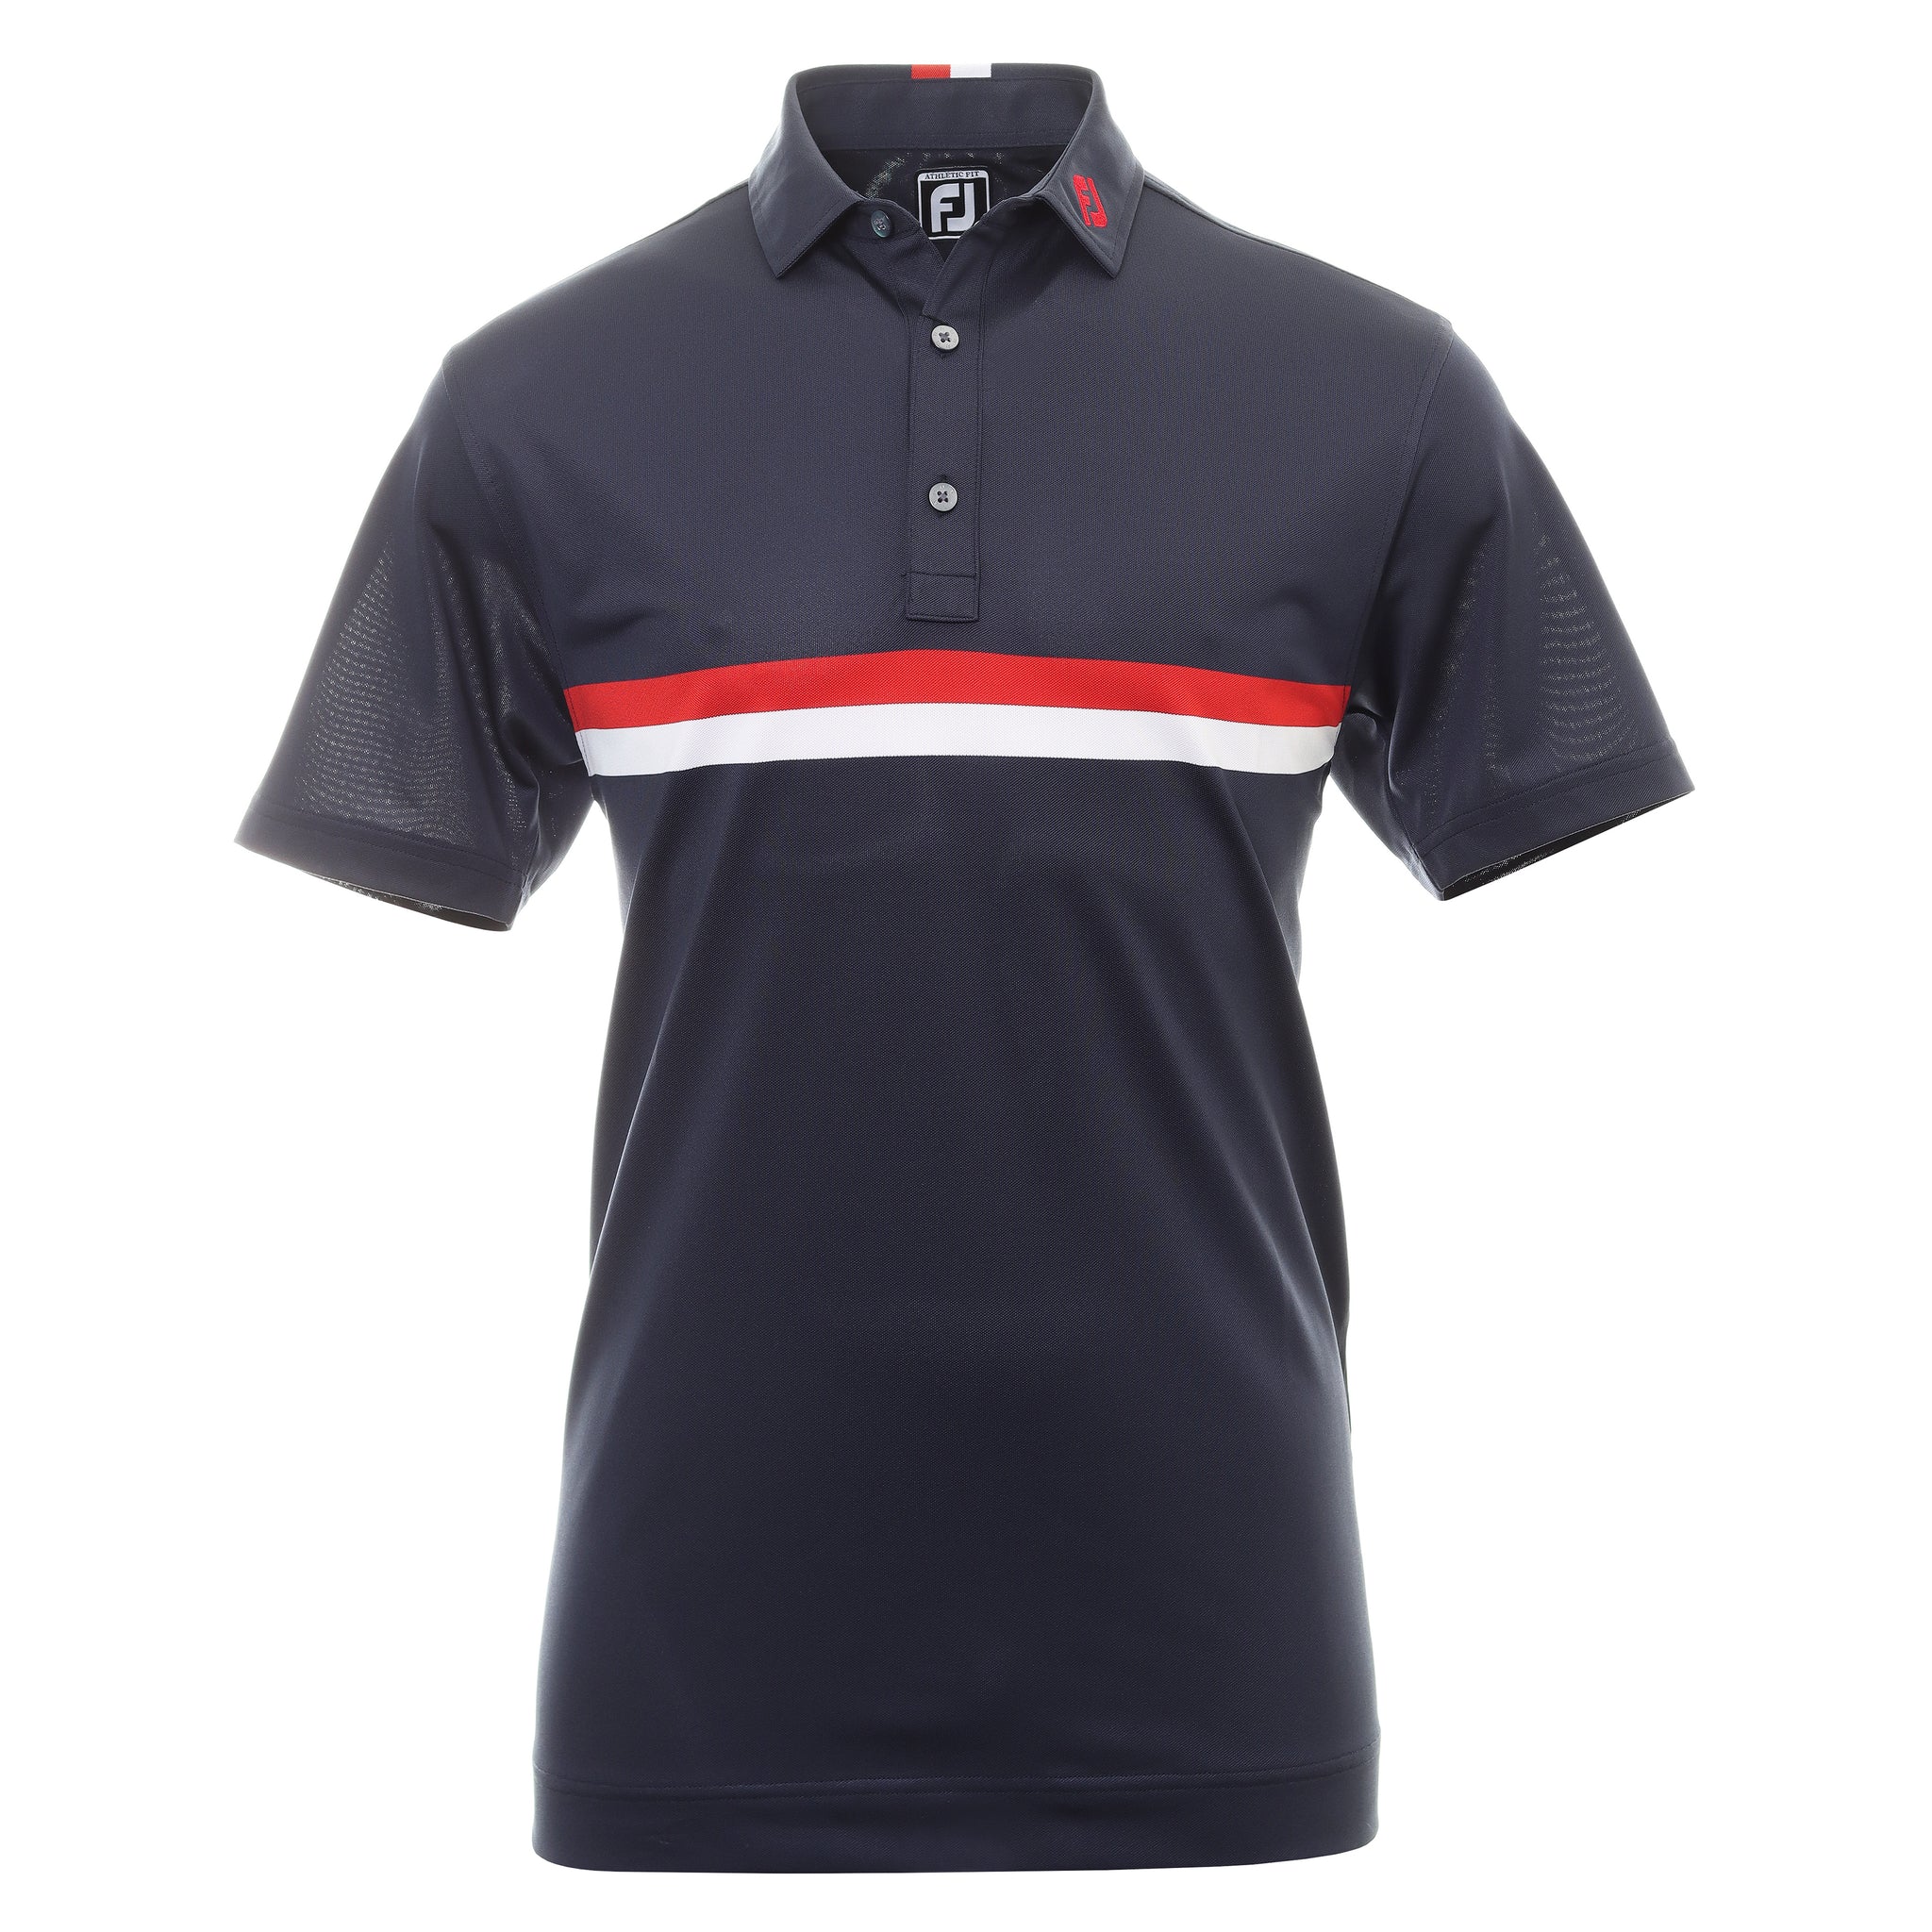 footjoy-double-chest-band-pique-golf-shirt-88440-navy-red-white